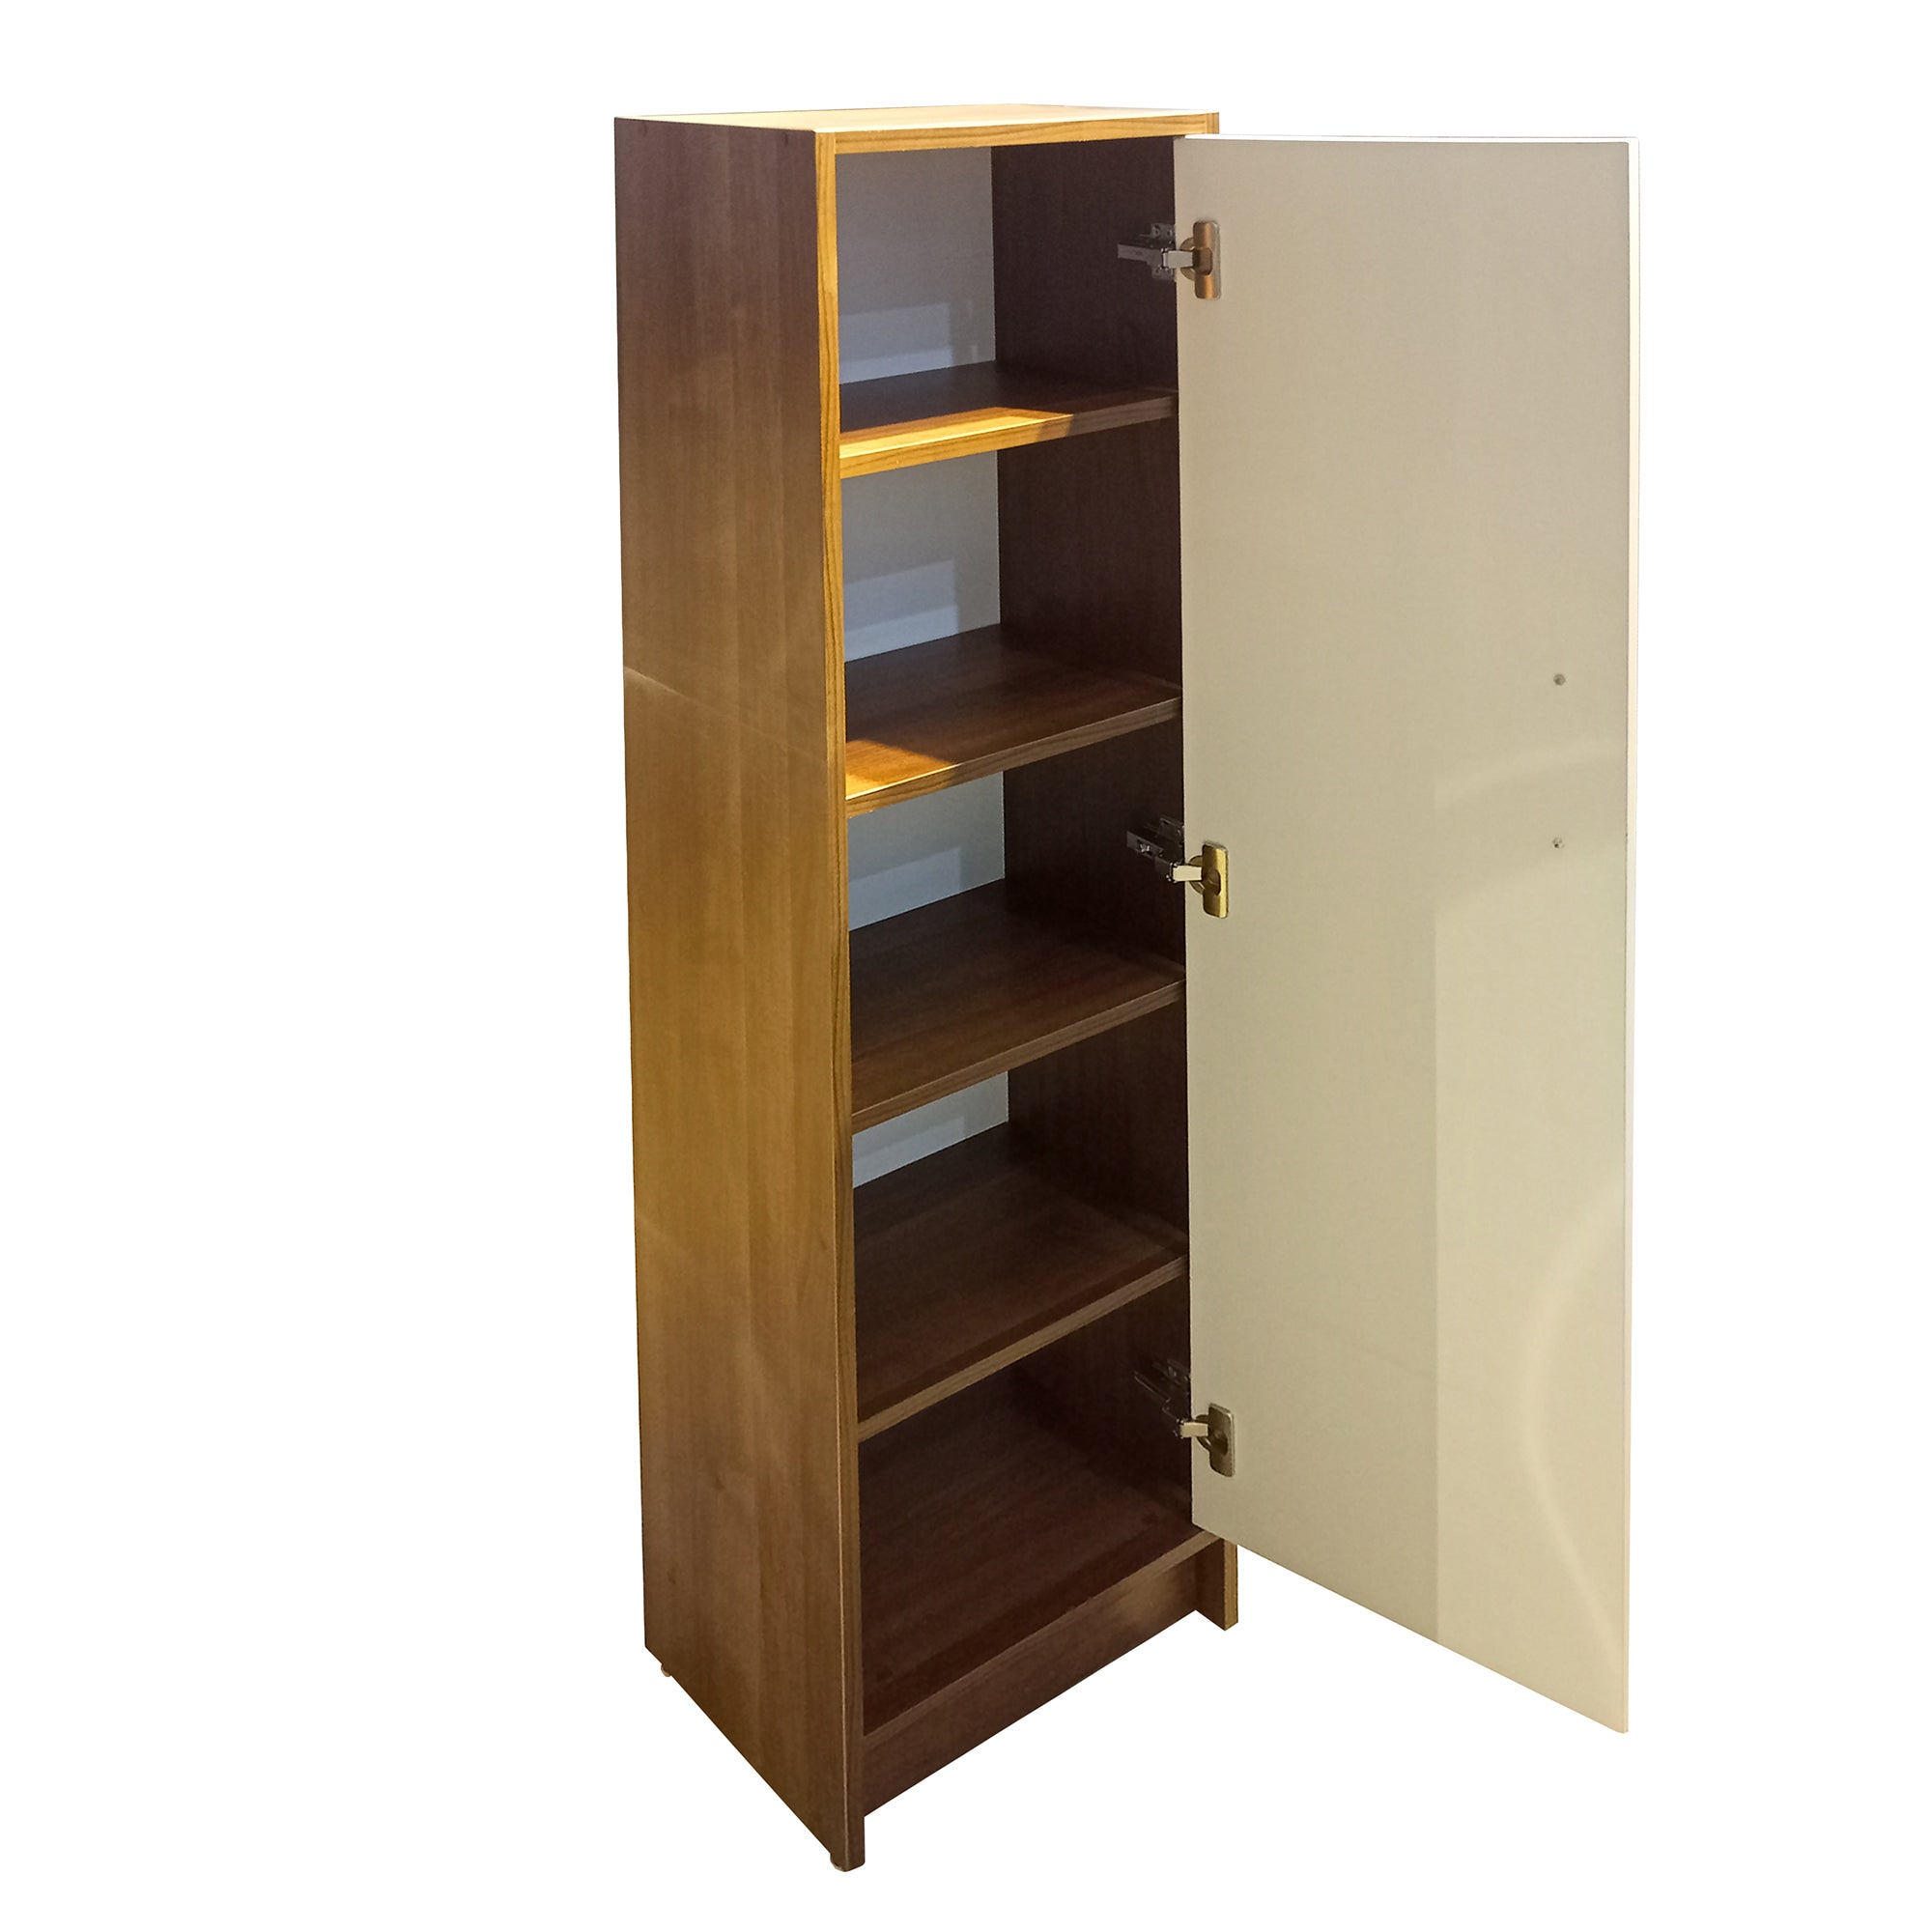 Storage cupboard brown in beige with one lea